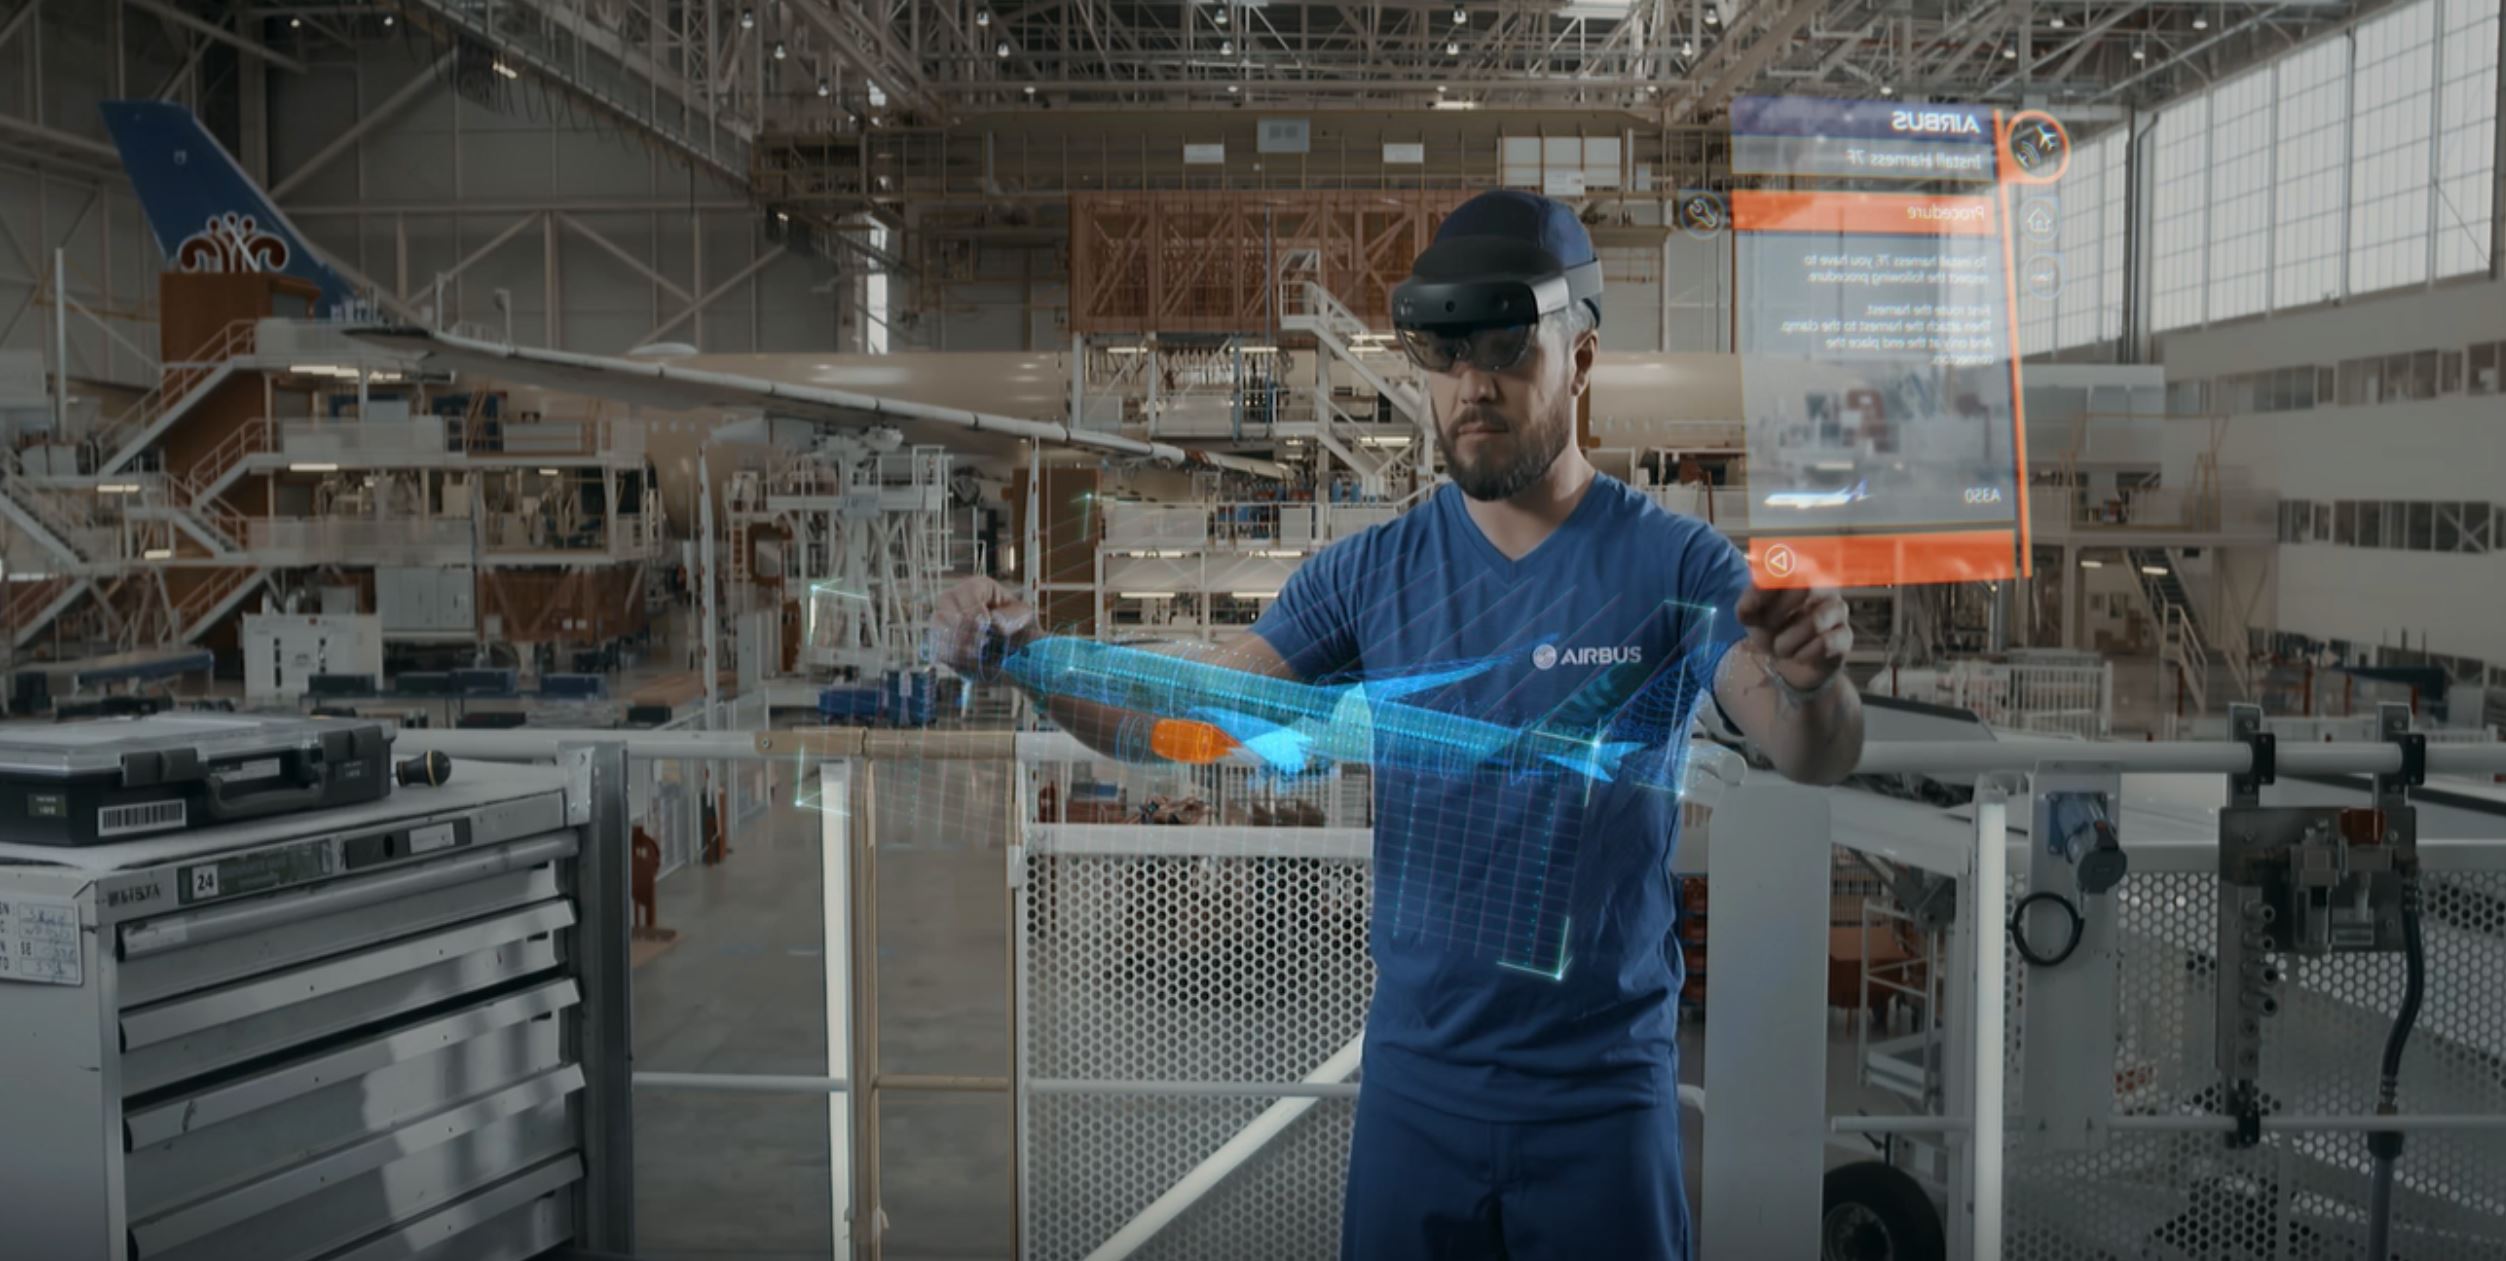 Holographic technology from Microsoft will be key to helping Airbus manufacture more aircraft faster.